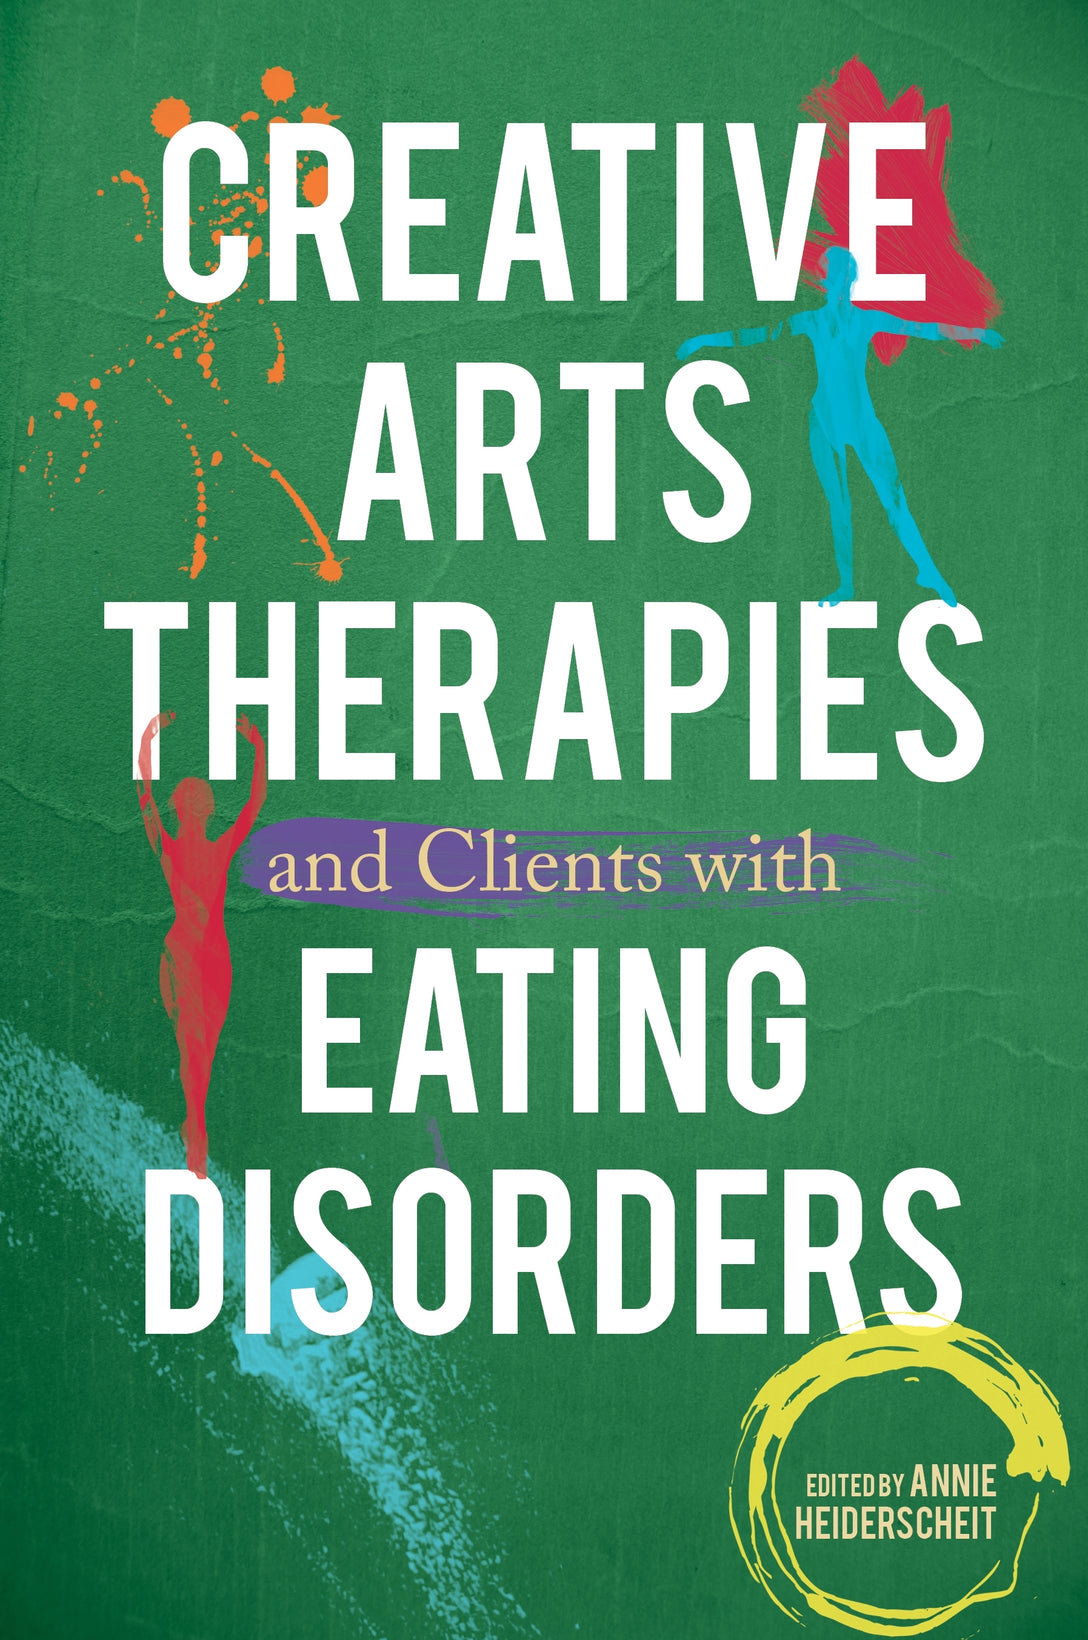 Creative Arts Therapies and Clients with Eating Disorders by No Author Listed, Annie Heiderscheit